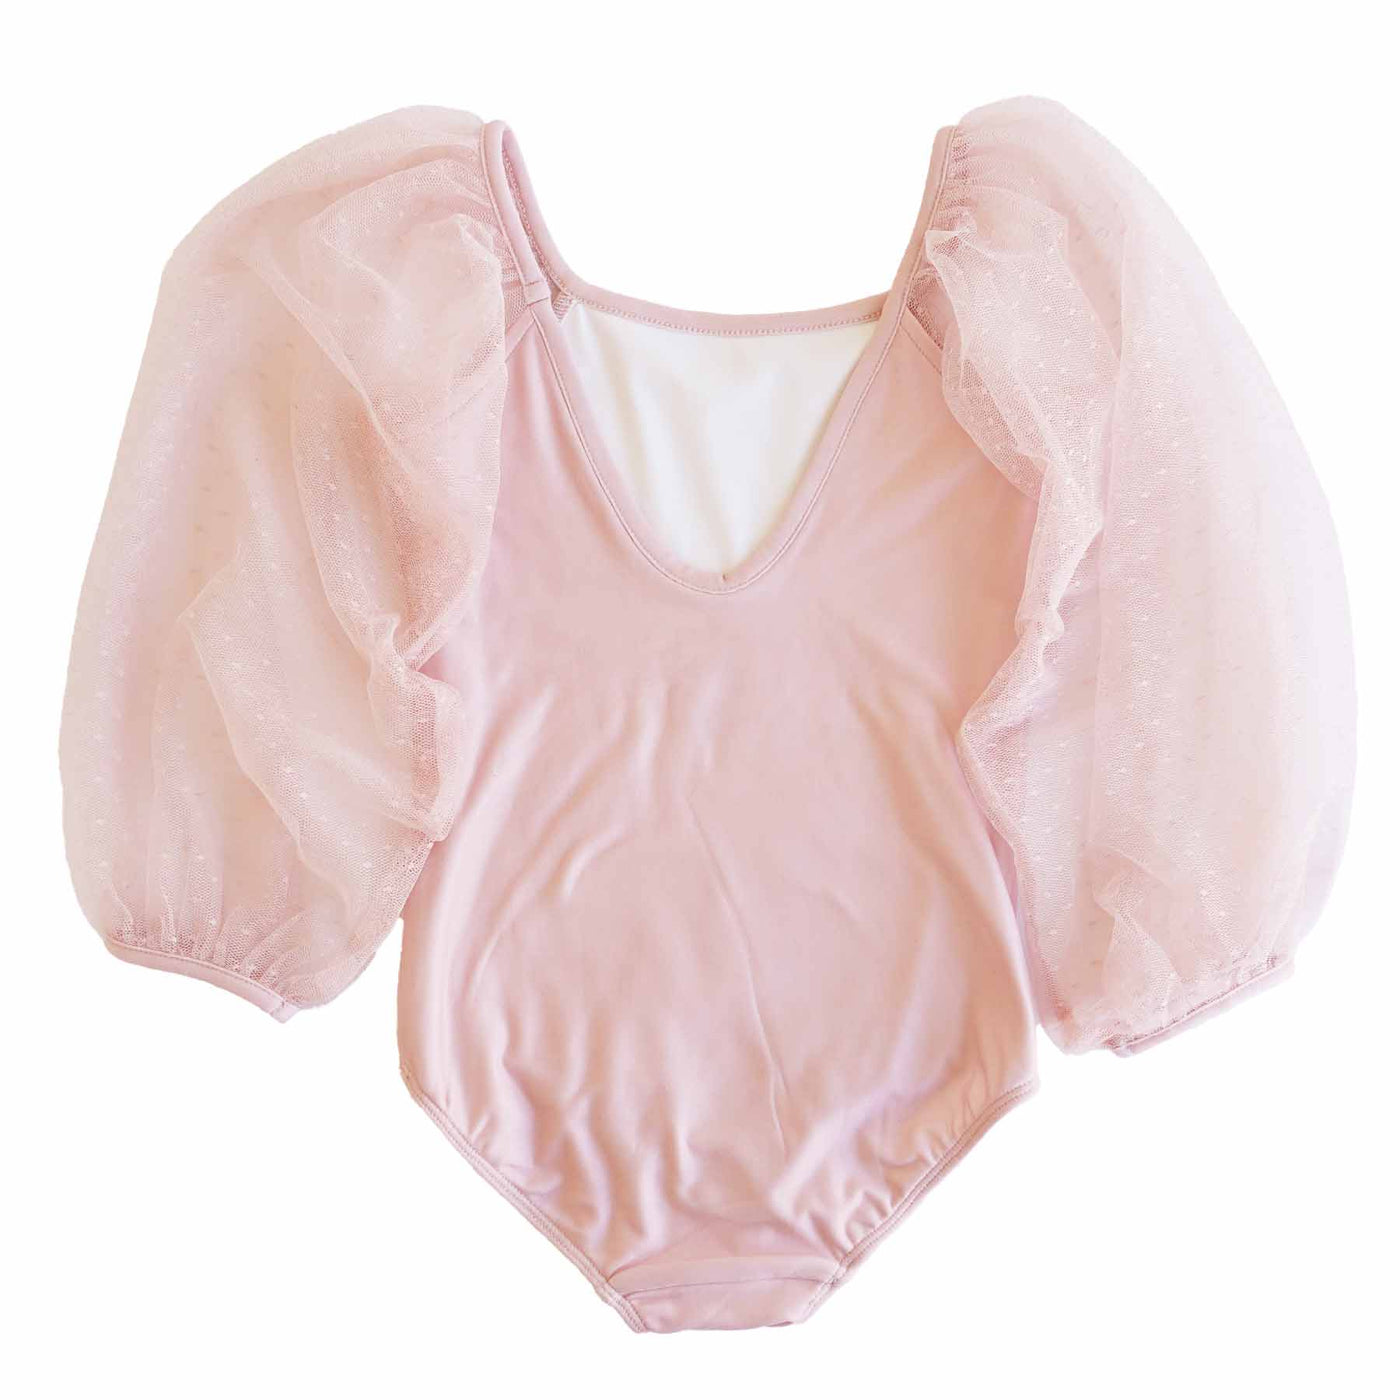 solid mauve leotard for girls with long sleeves